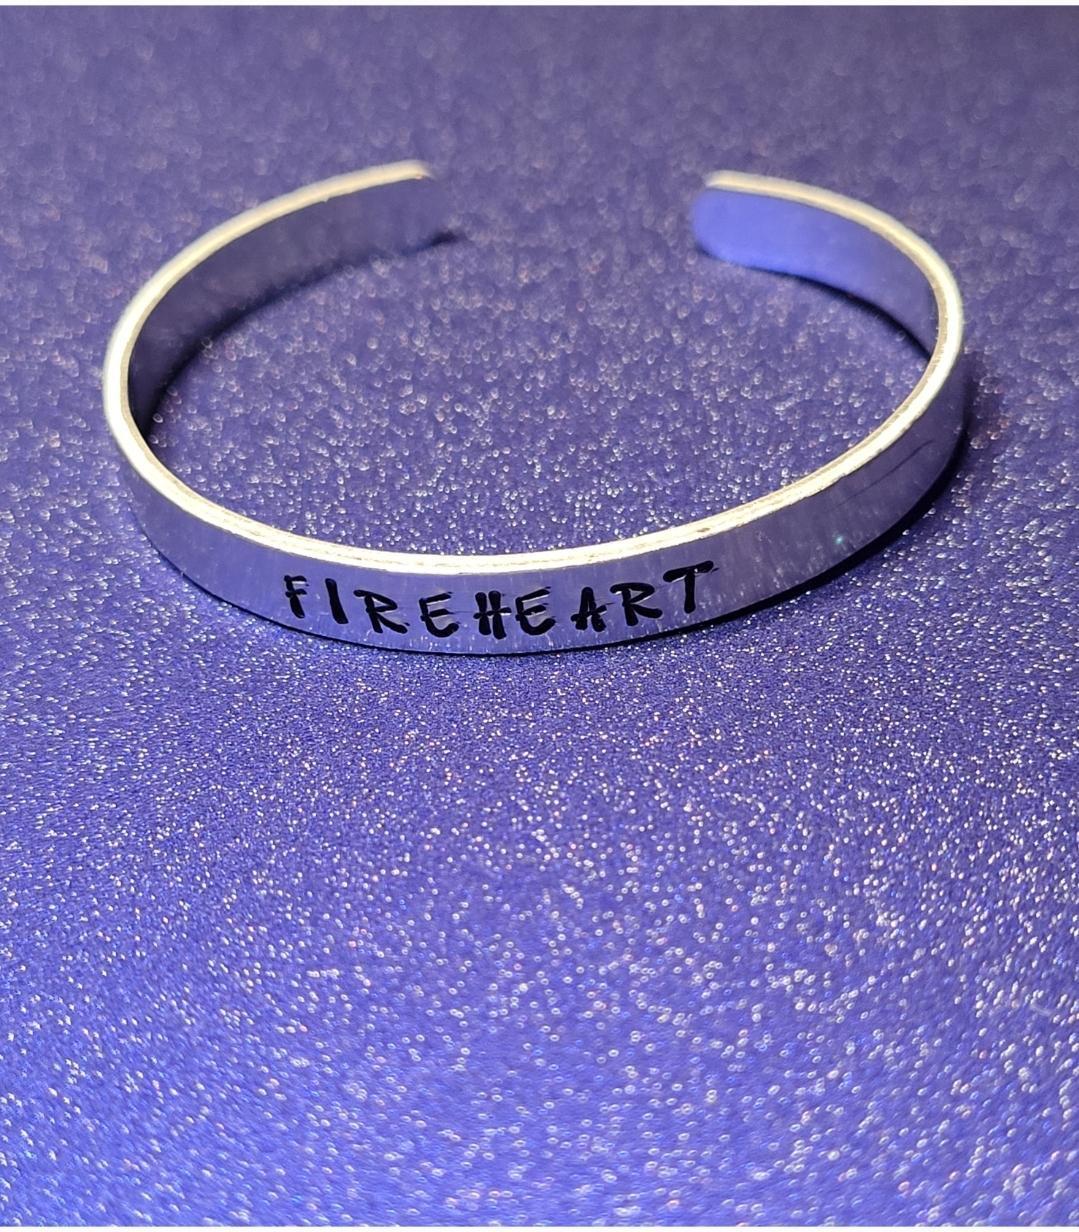 Throne of Glass Silver Aluminum Cuff Bracelets - Officially Licensed by Sarah J. Maas